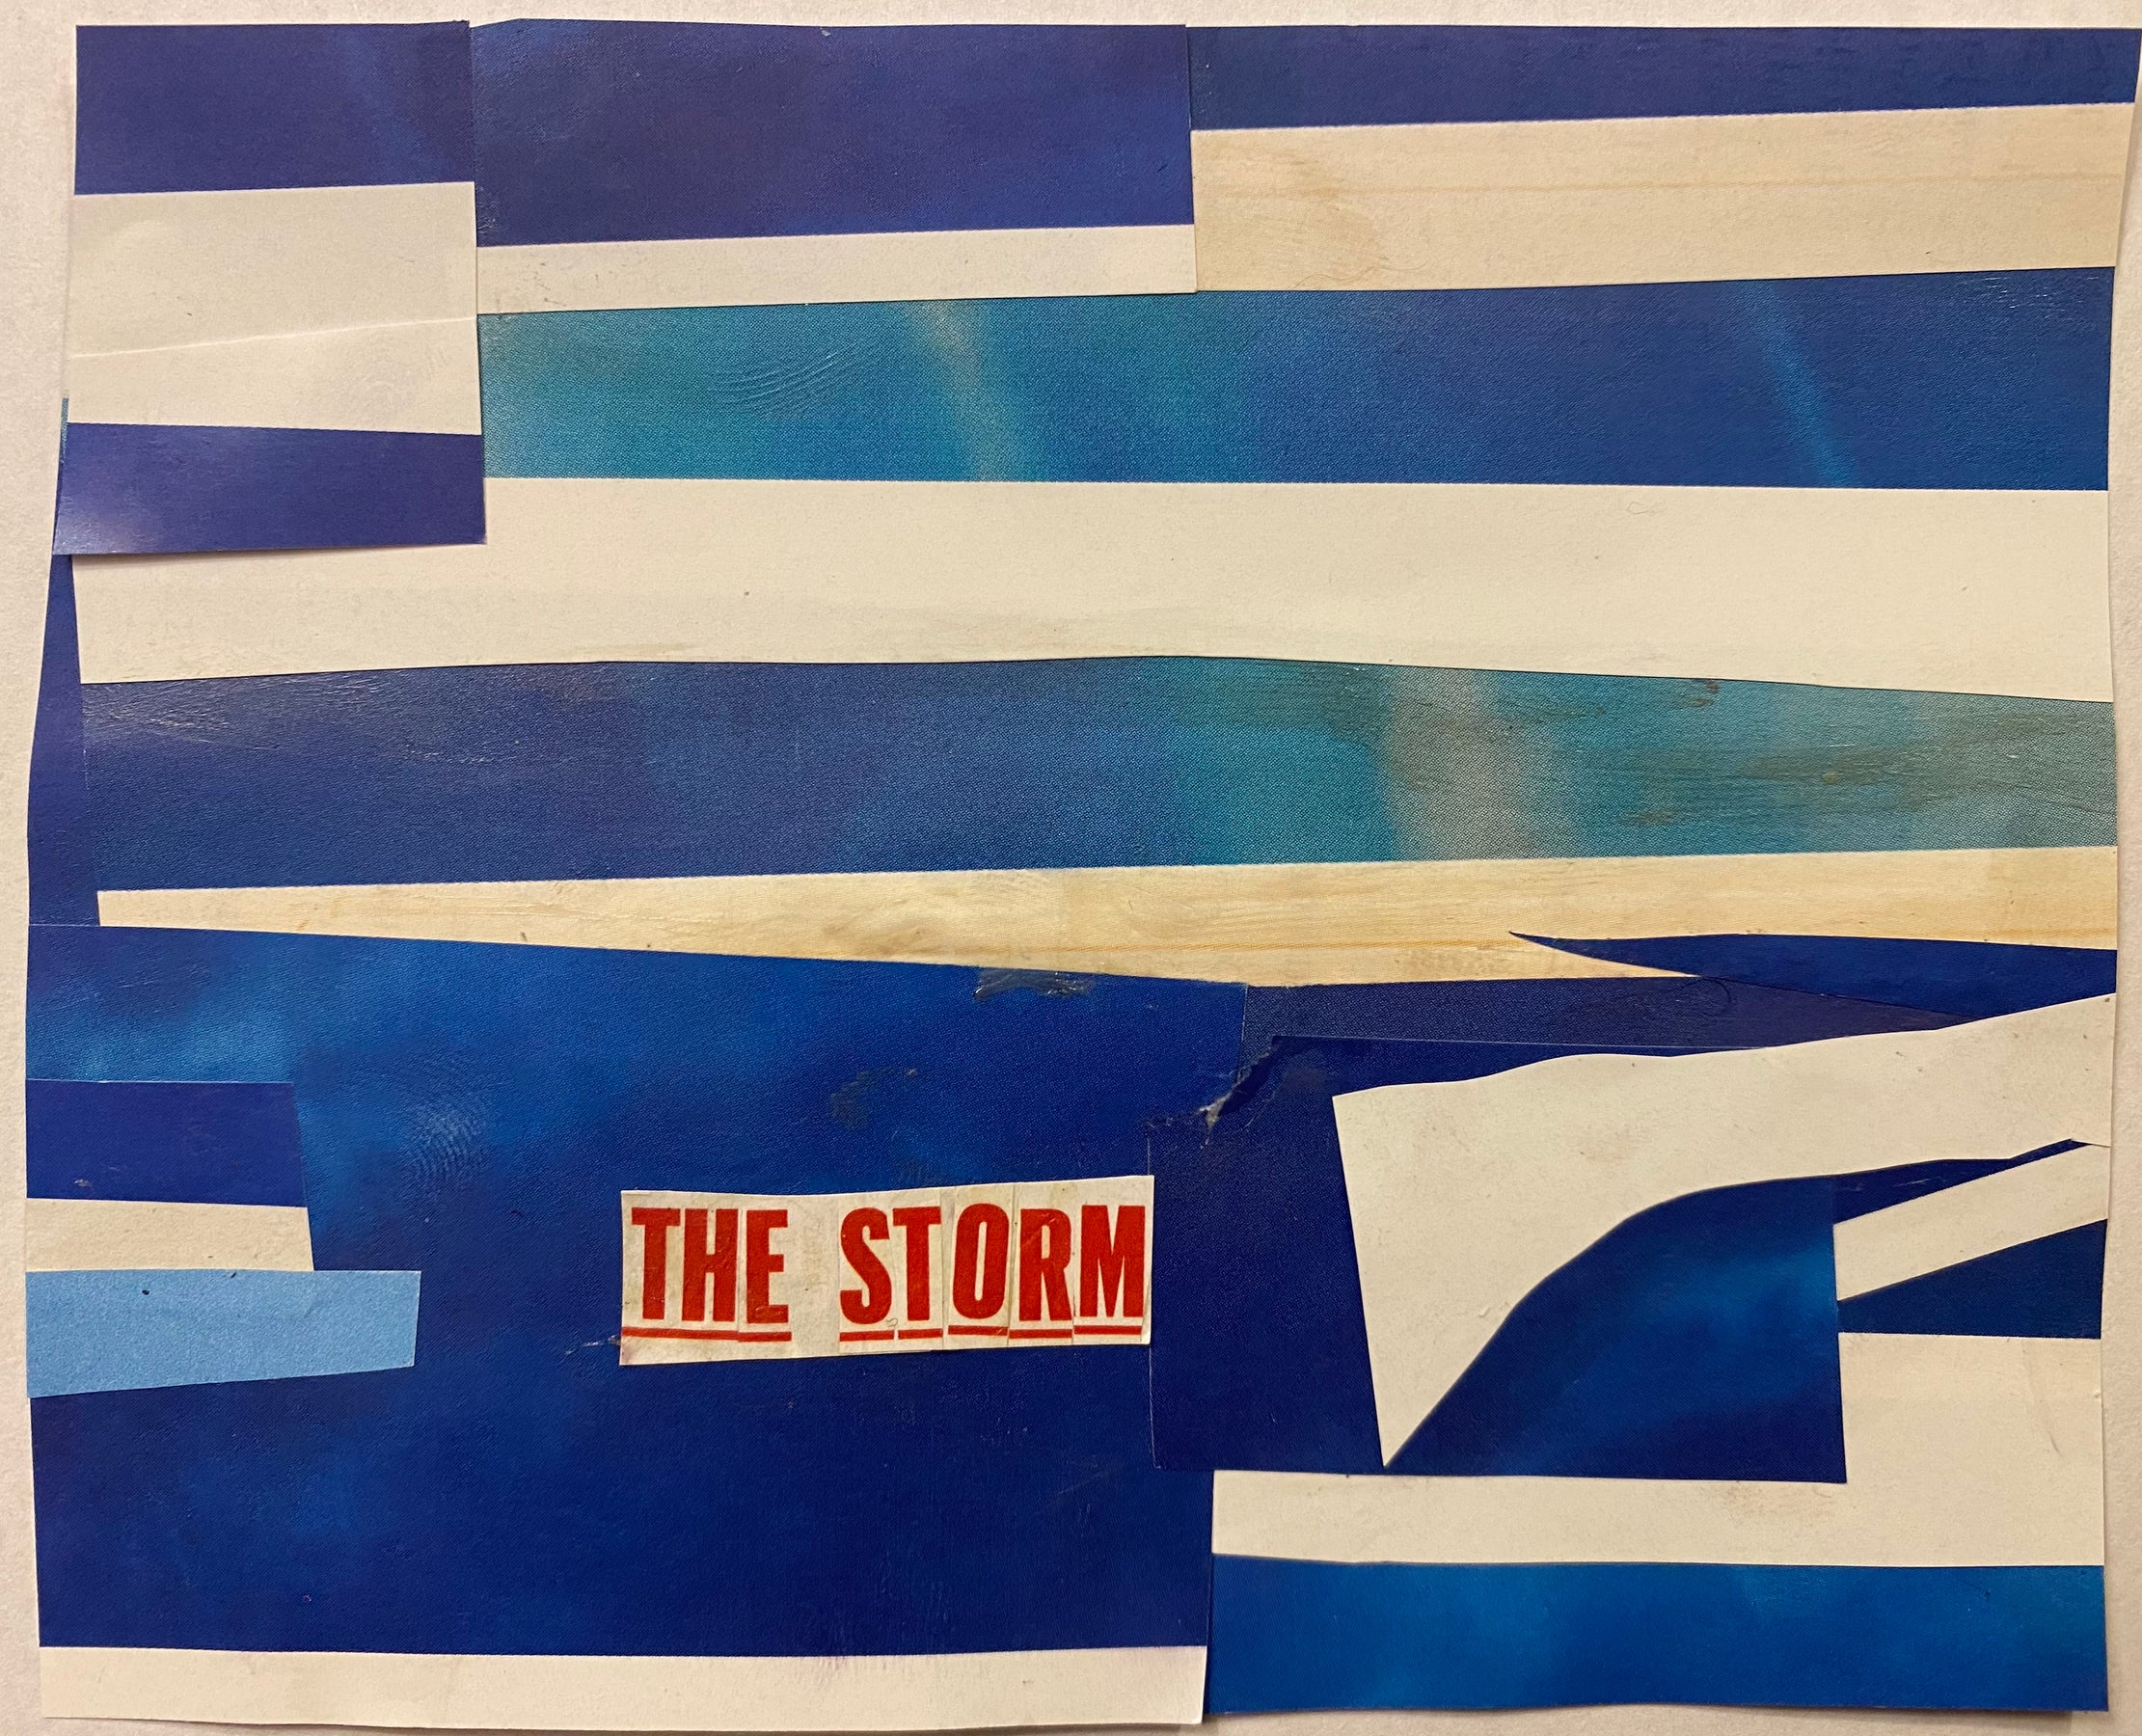 A collage of blue and white colors with the title "THE STORM"